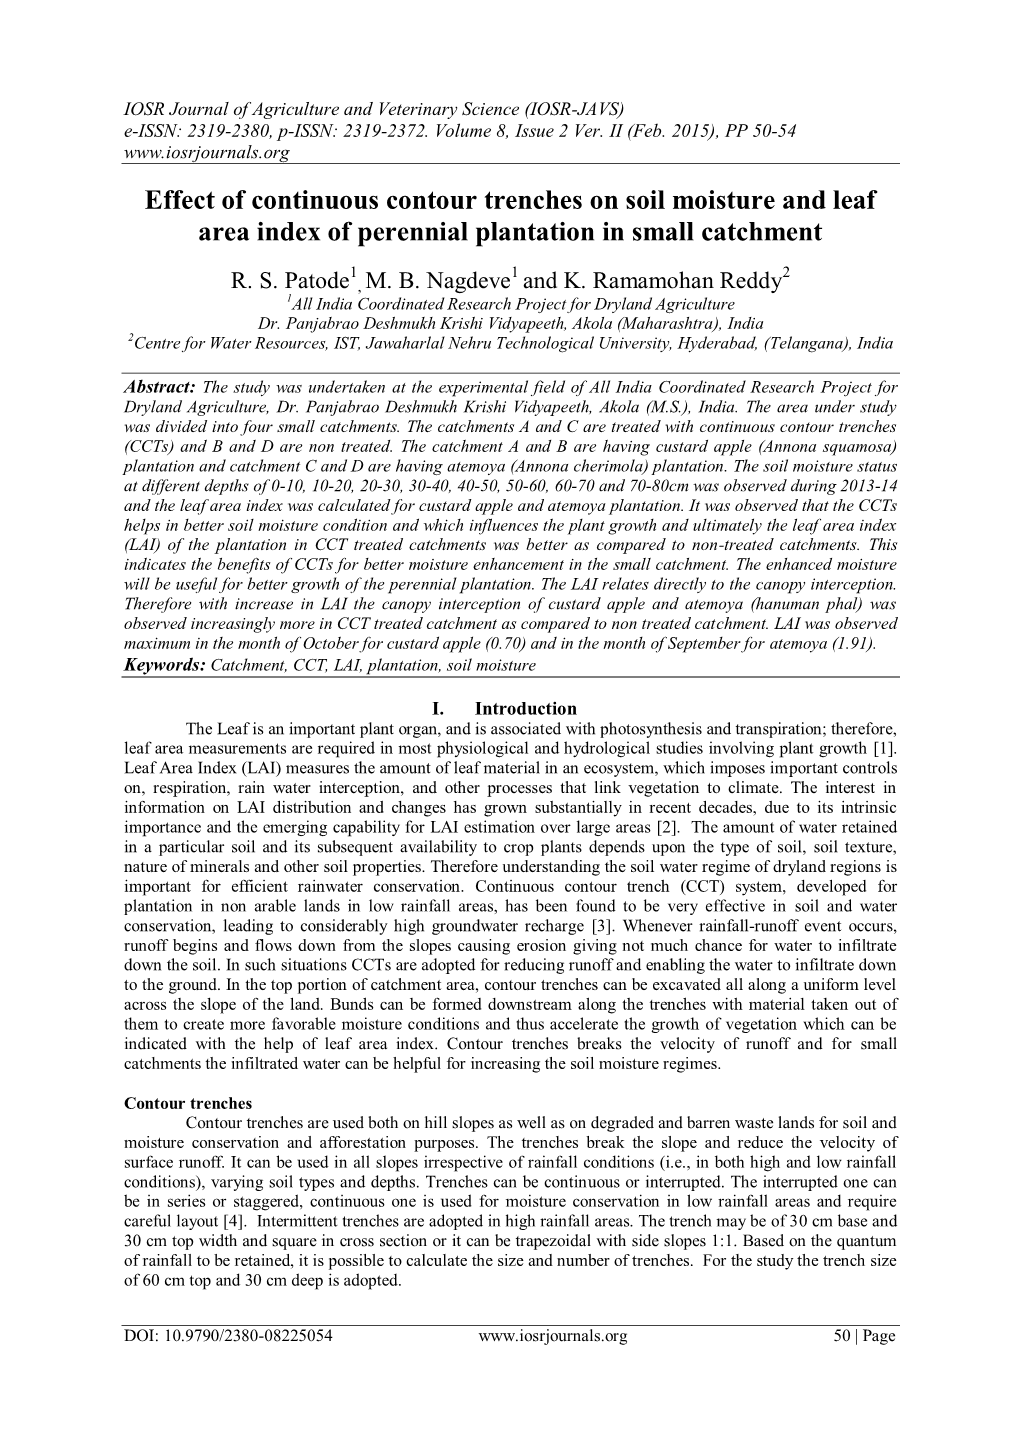 Effect of Continuous Contour Trenches on Soil Moisture and Leaf Area Index of Perennial Plantation in Small Catchment